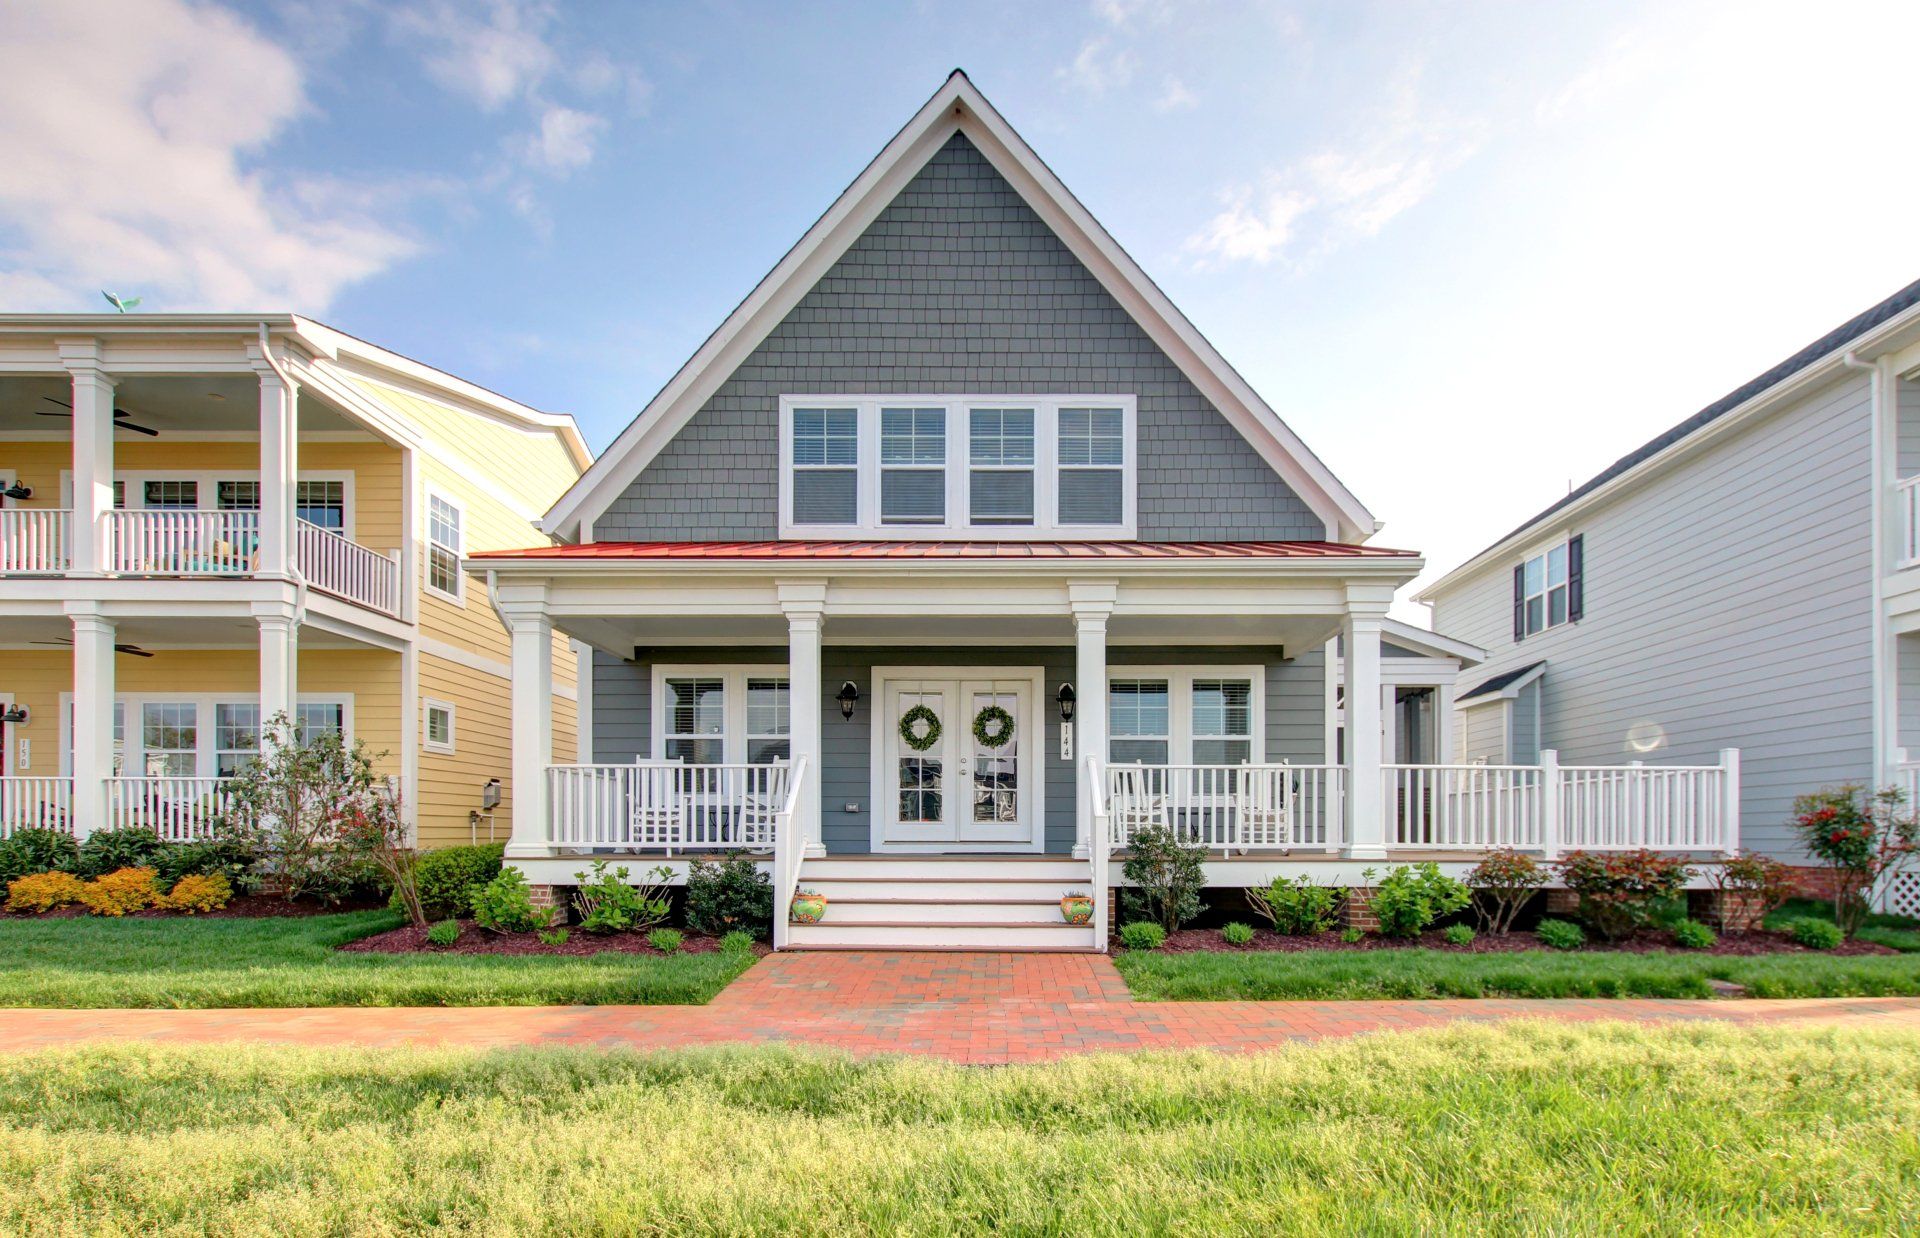 Grey home with porch exterior | Sawgrass Classic | Covell Communities | Chester, Maryland 21619